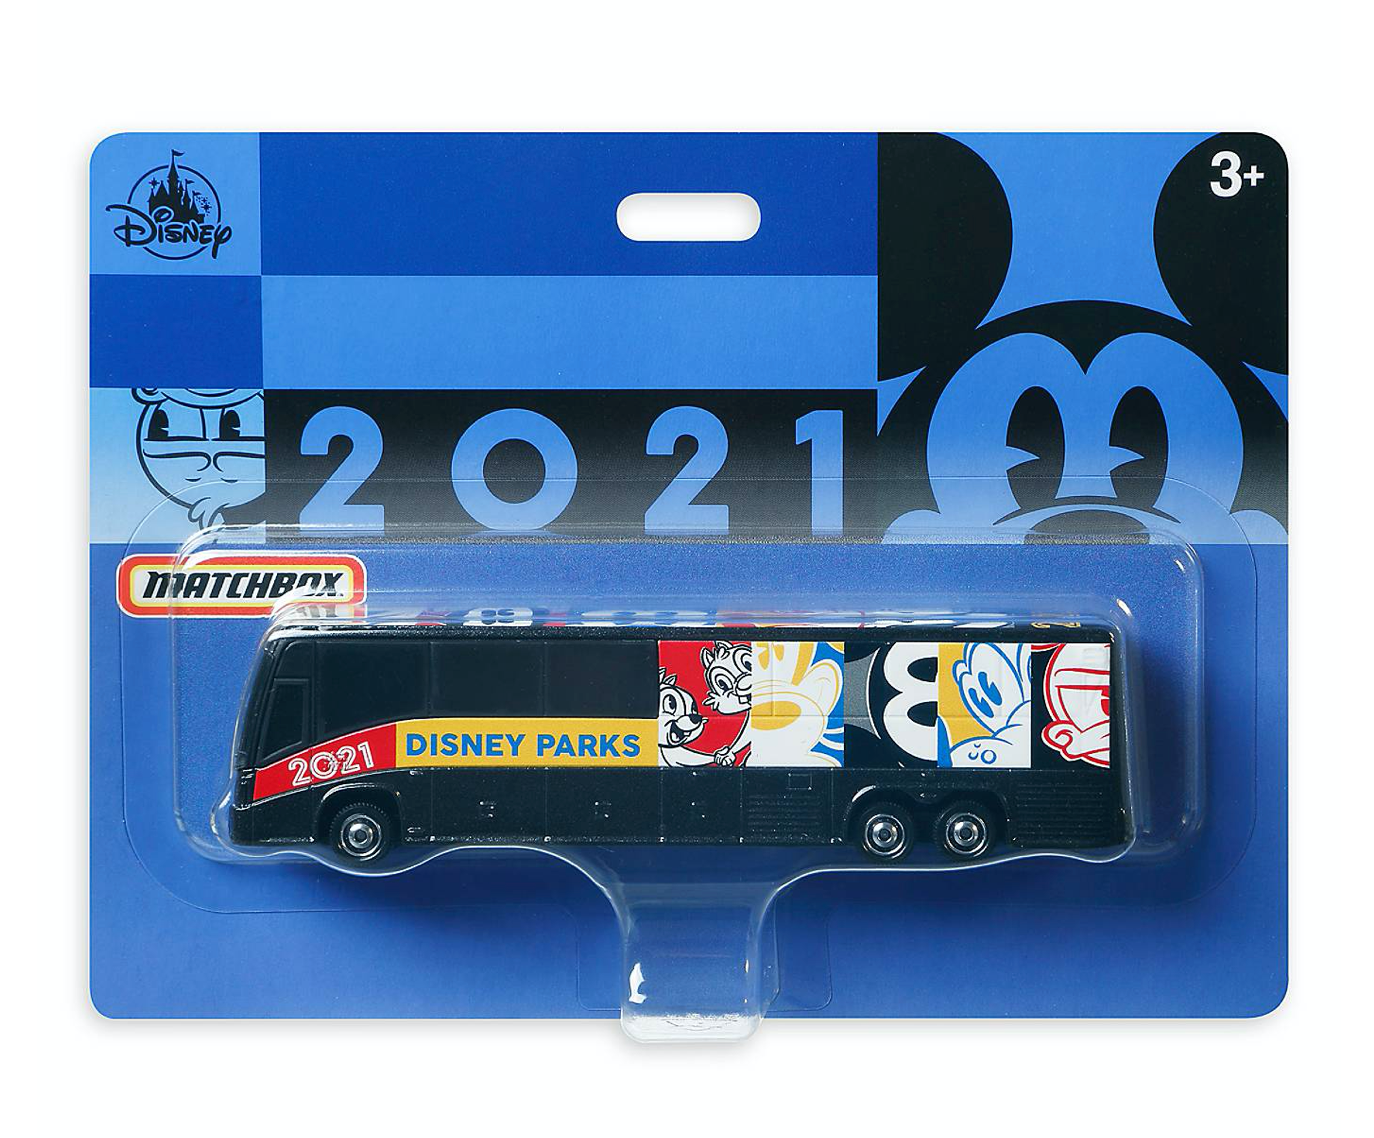 Disney Parks Mickey and Friends Toy Bus 2021 by Matchbox New with Box